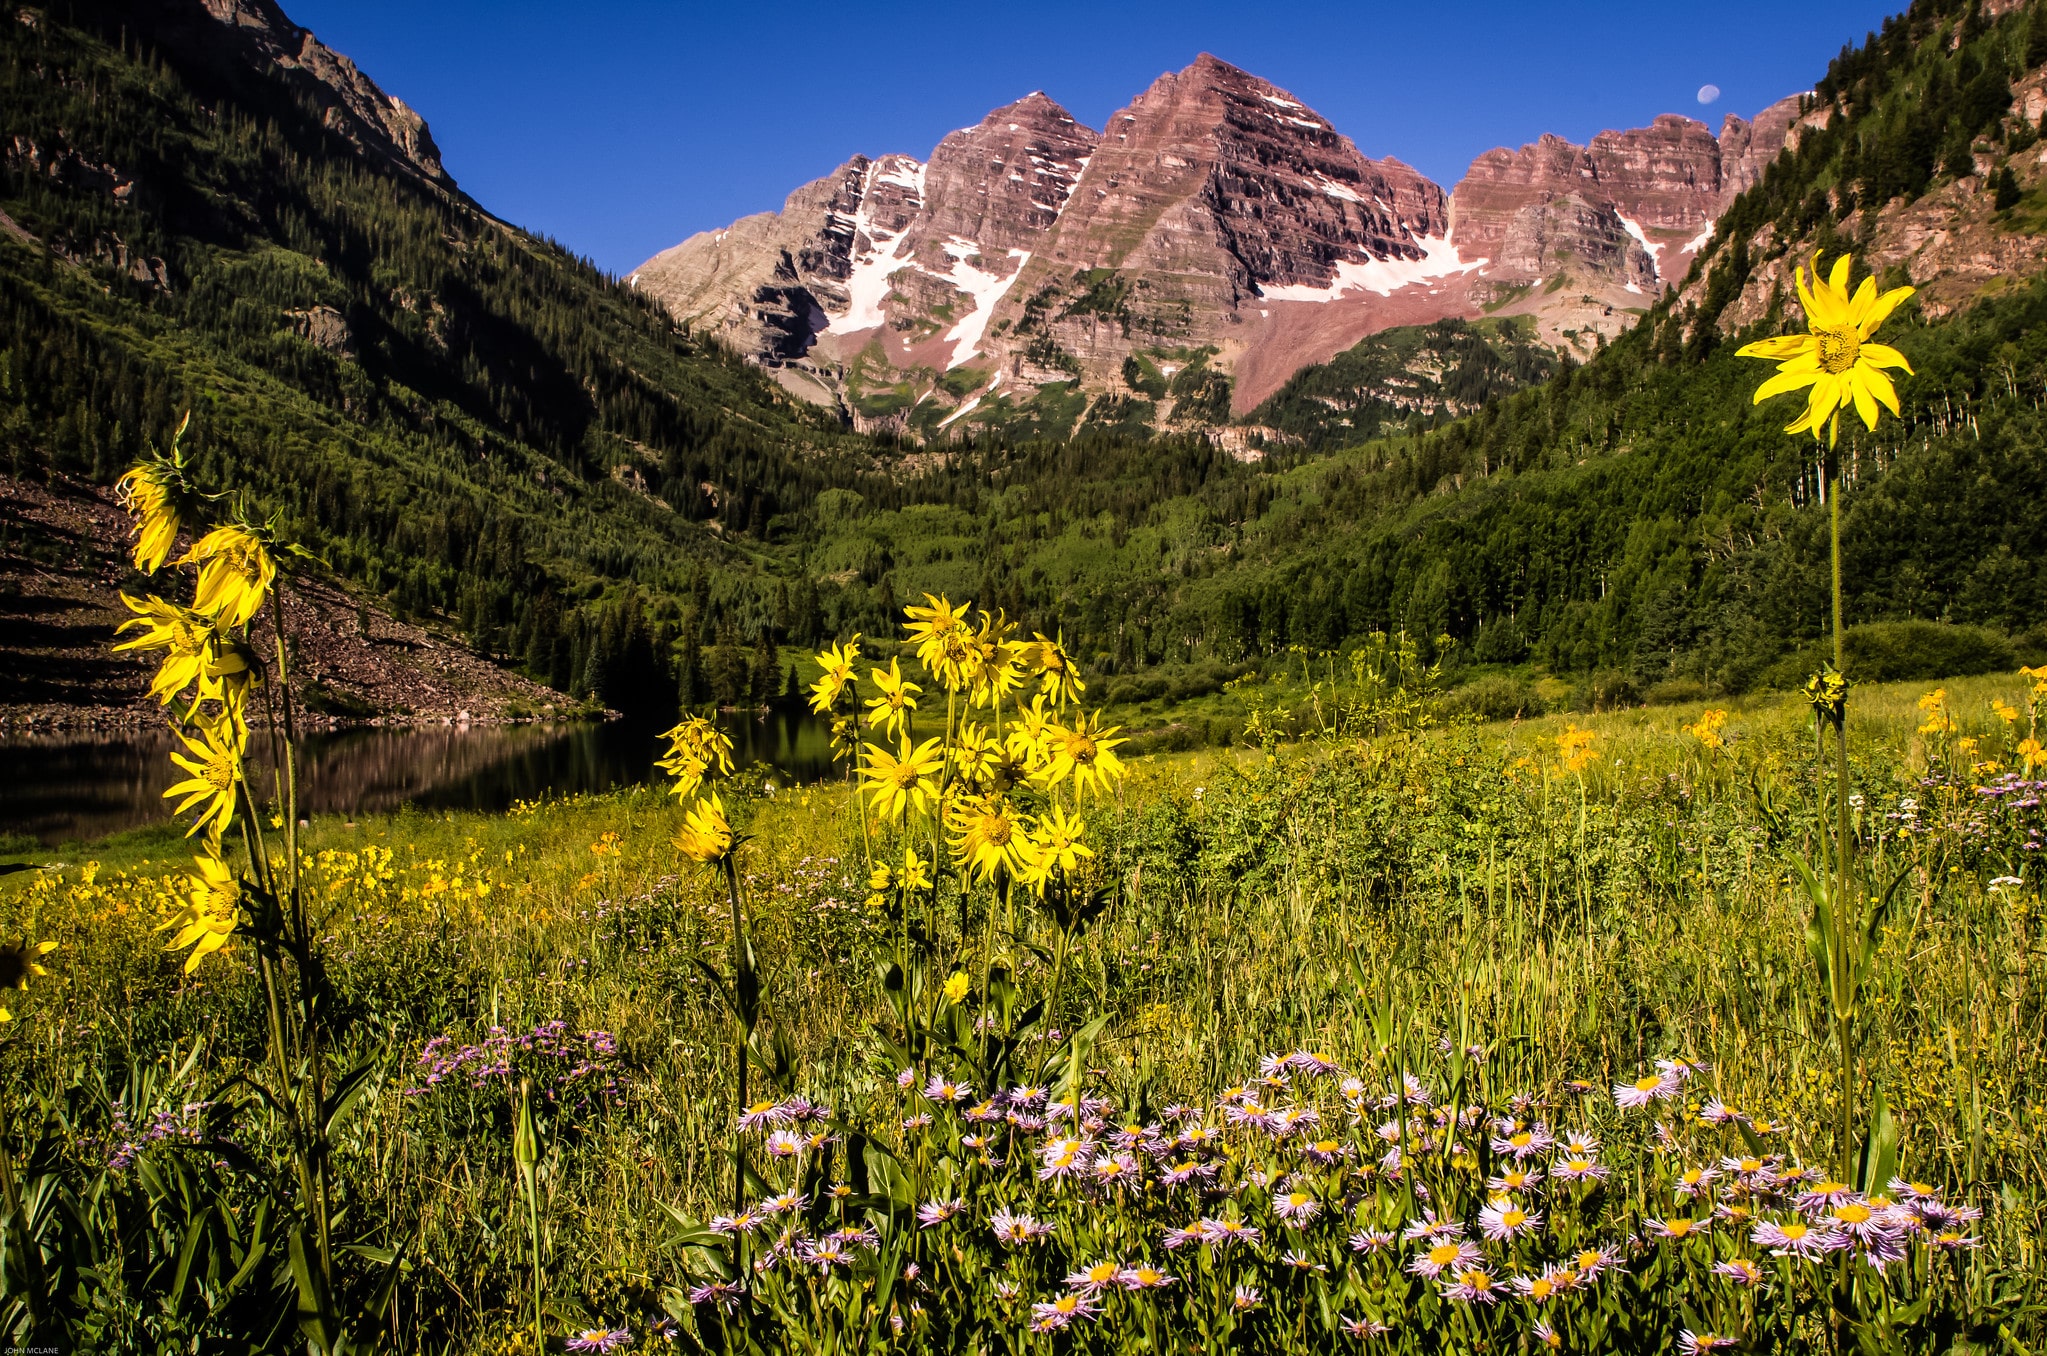 Wildflowers in foreground with large mountain and blue skies in the back